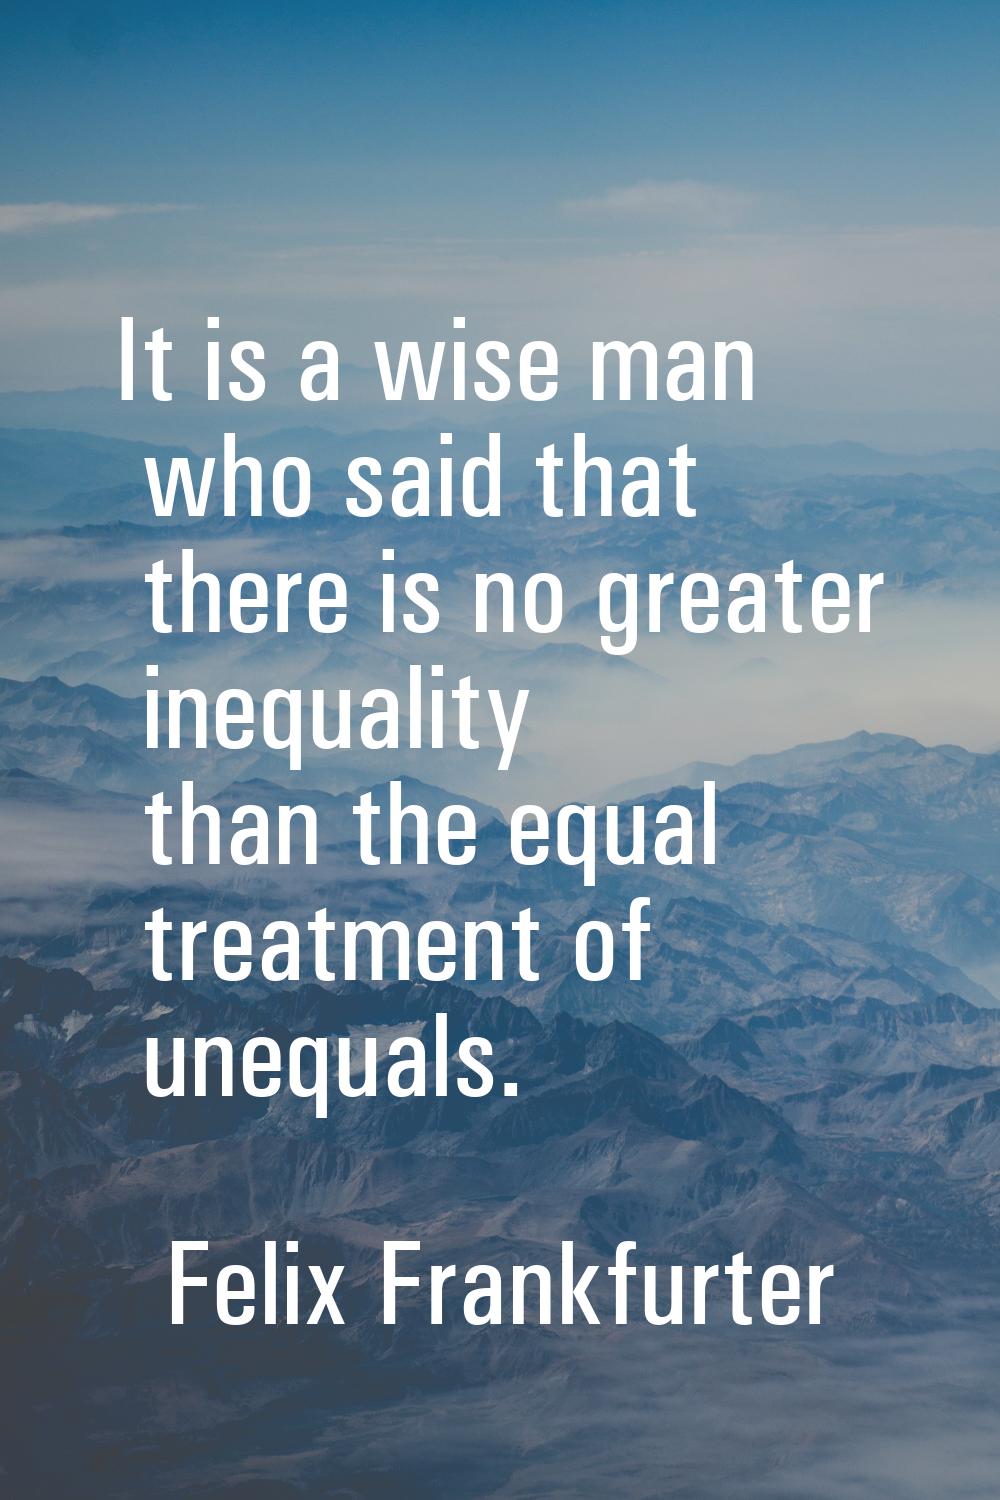 It is a wise man who said that there is no greater inequality than the equal treatment of unequals.